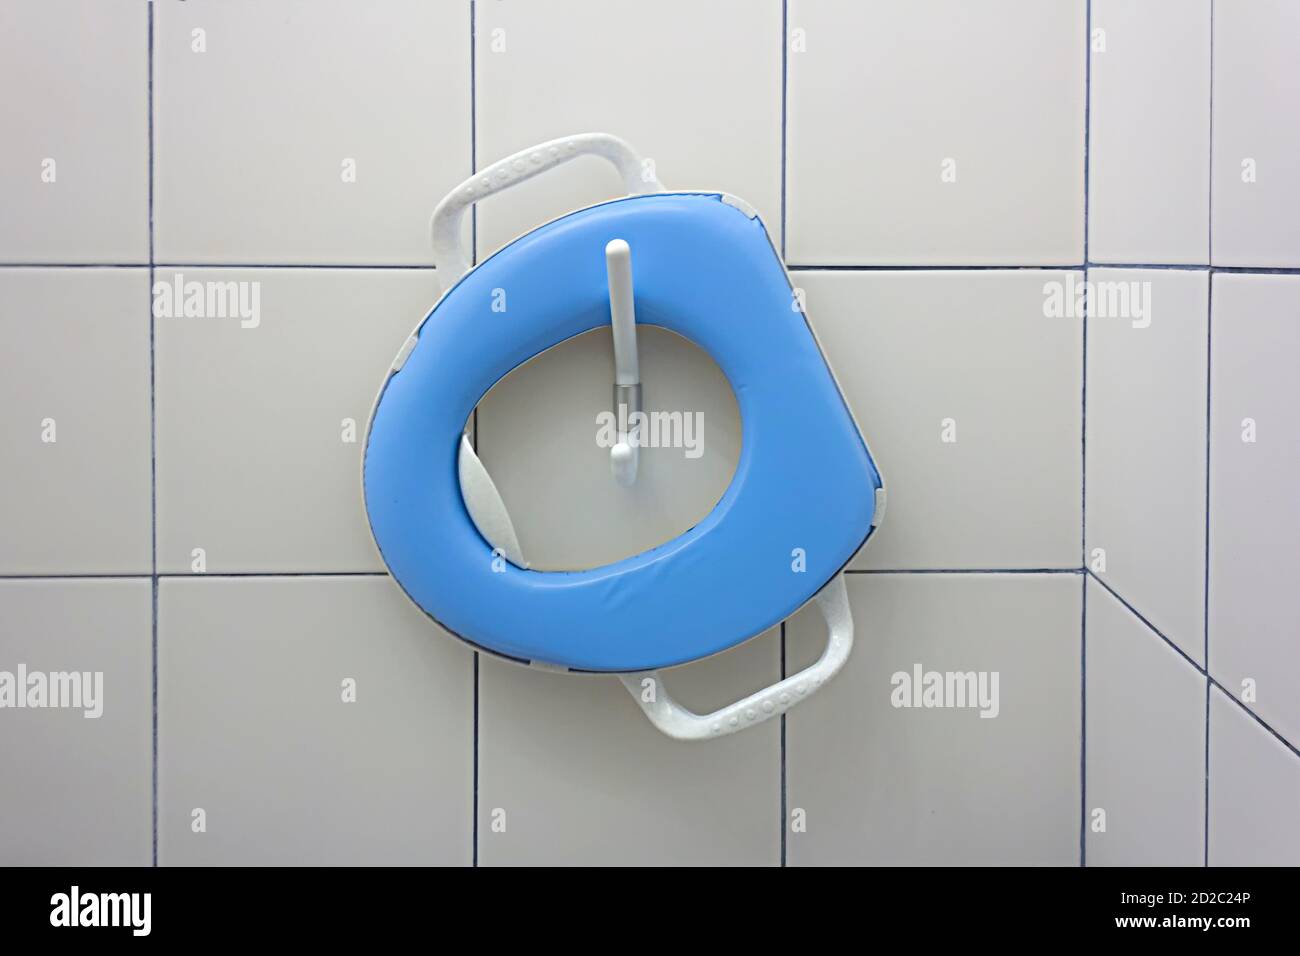 Blue child, toddler toilet seat hanging on a hook on a white ceramic tiles wall in an indoor WC, toilet room in a cafe Stock Photo